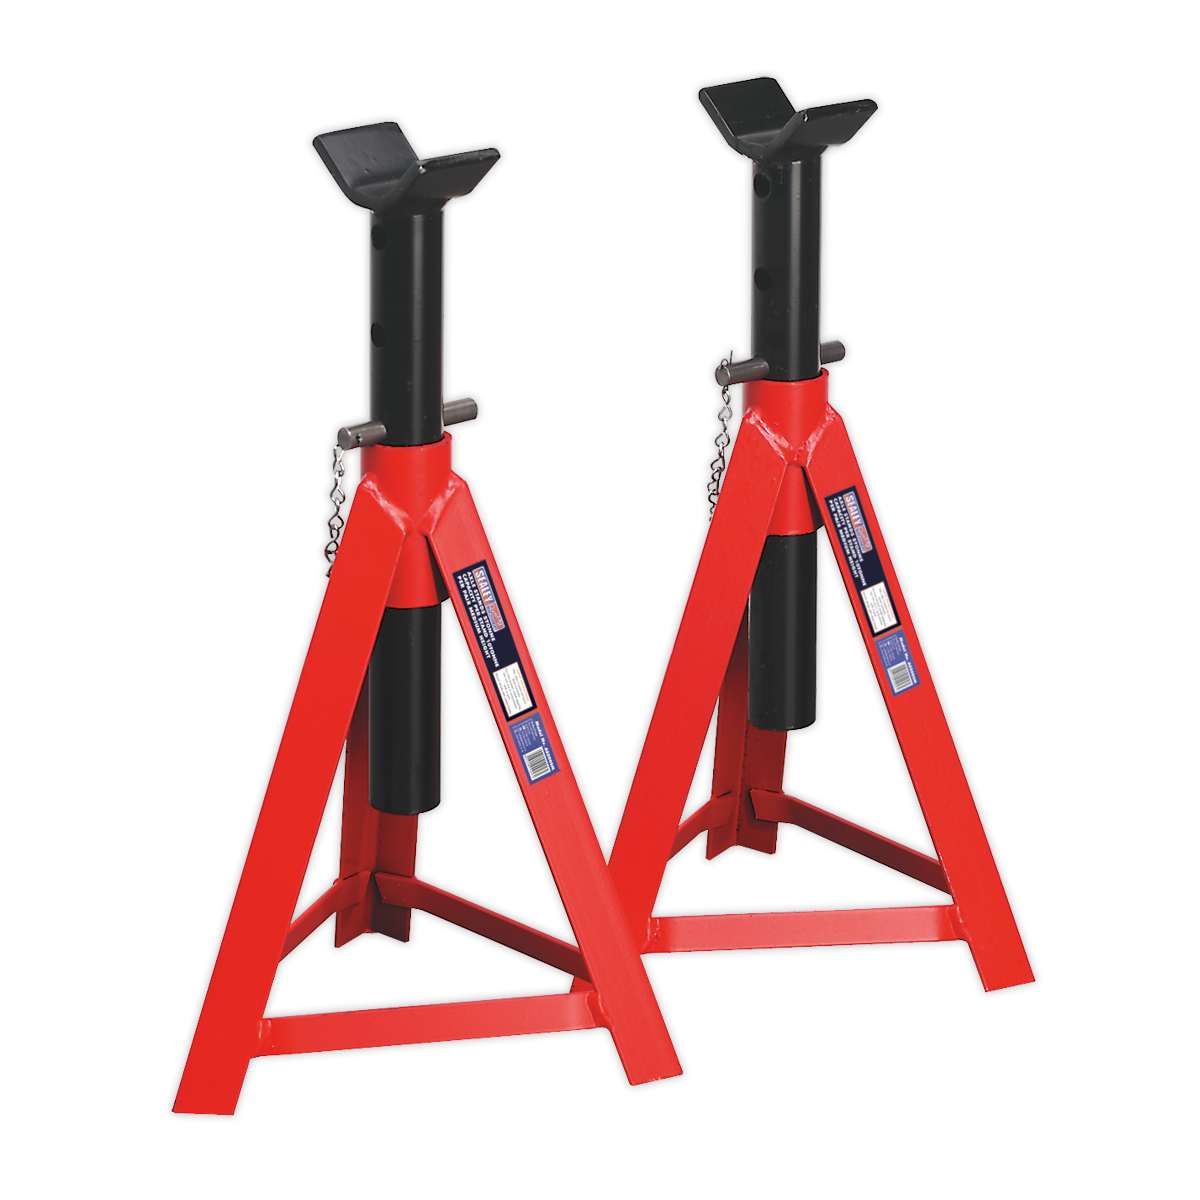 SEALEY - AS5000M Axle Stands (Pair) 5tonne Capacity per Stand